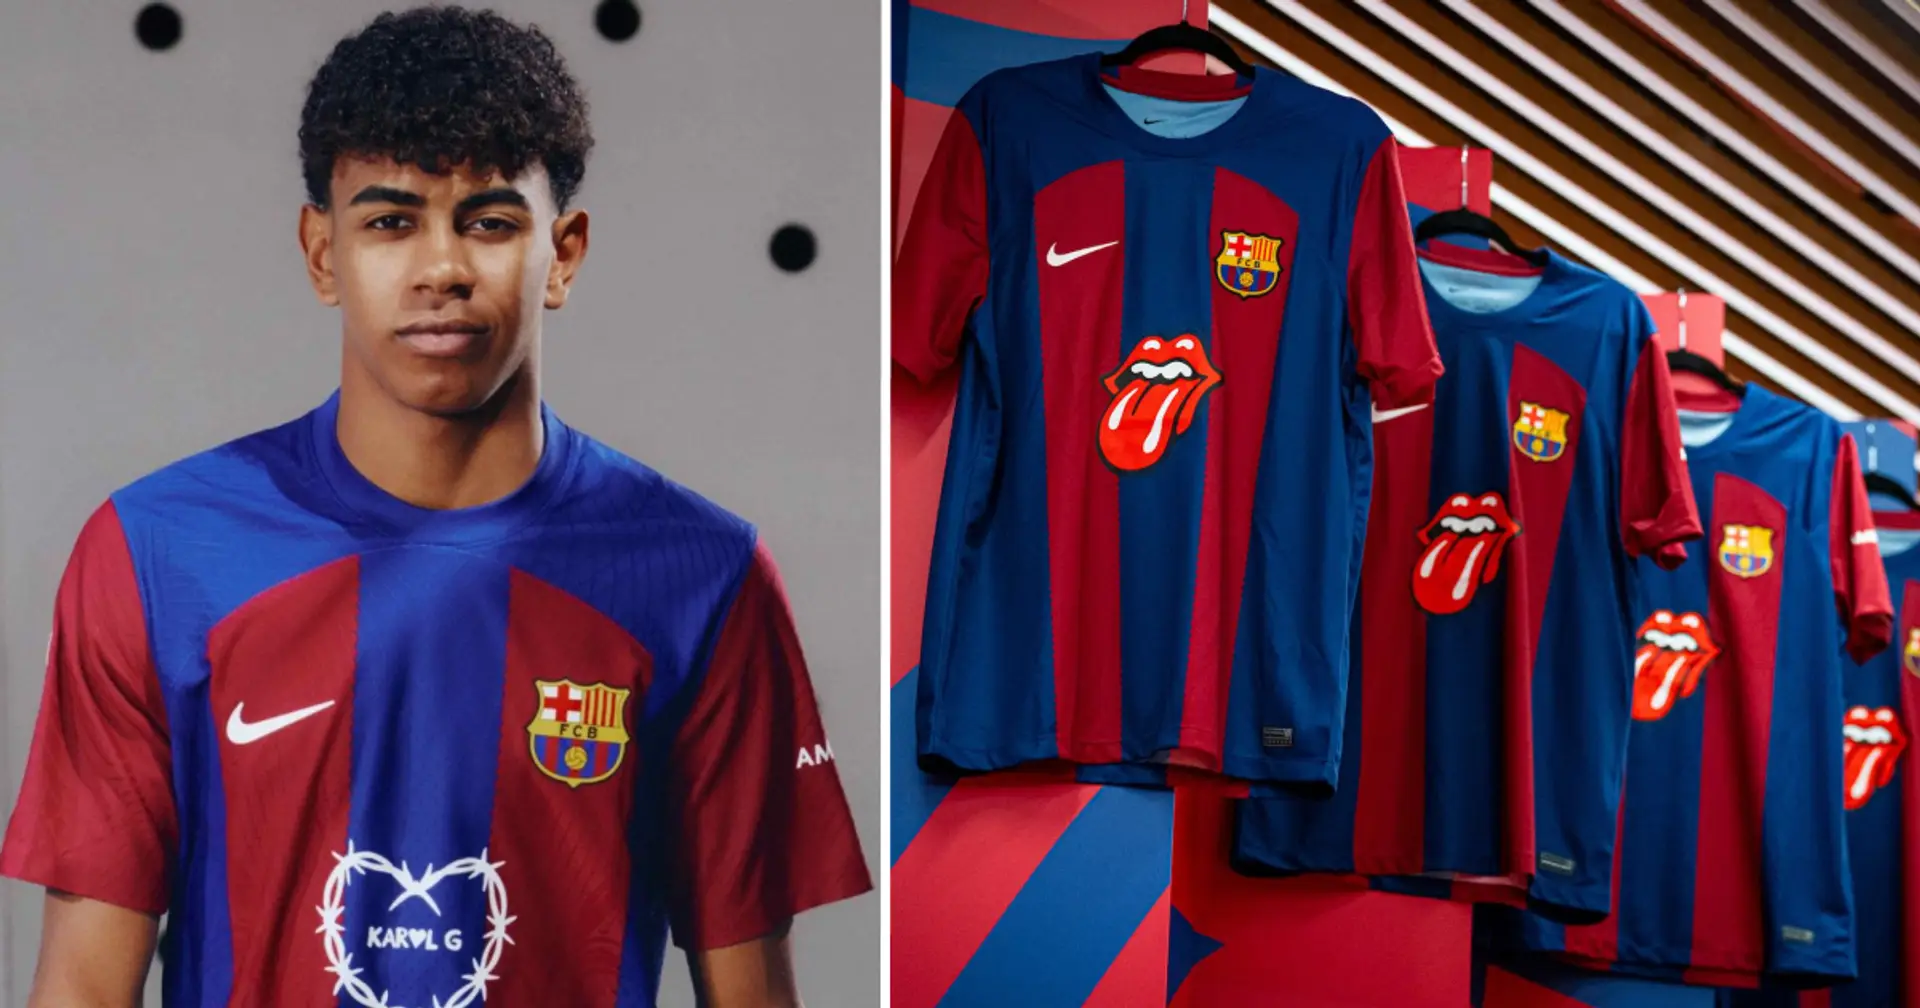 Barca receives 10-year shirt sponsorship offer – it could solve their financial problems